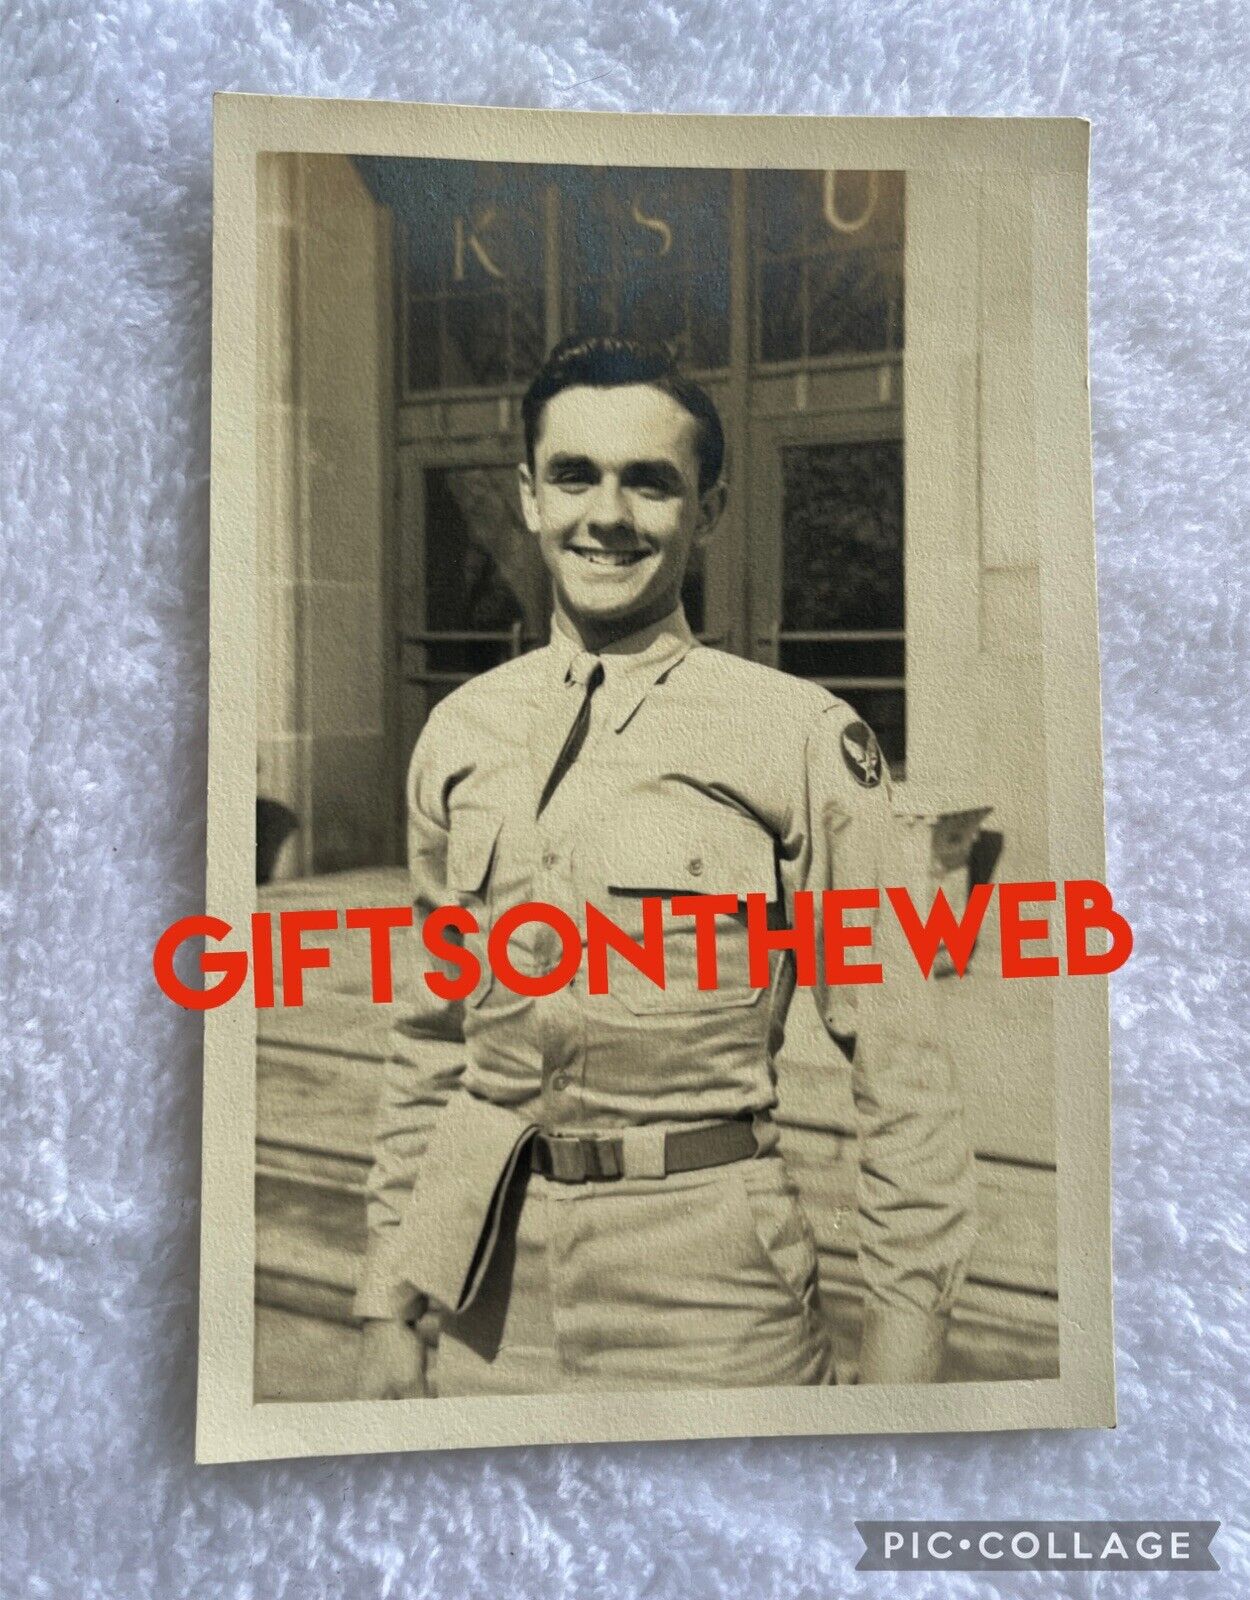 VTG Handsome SOLDIER in Uniform 1940s Photo Beefcake Beautiful Smile Gay Int